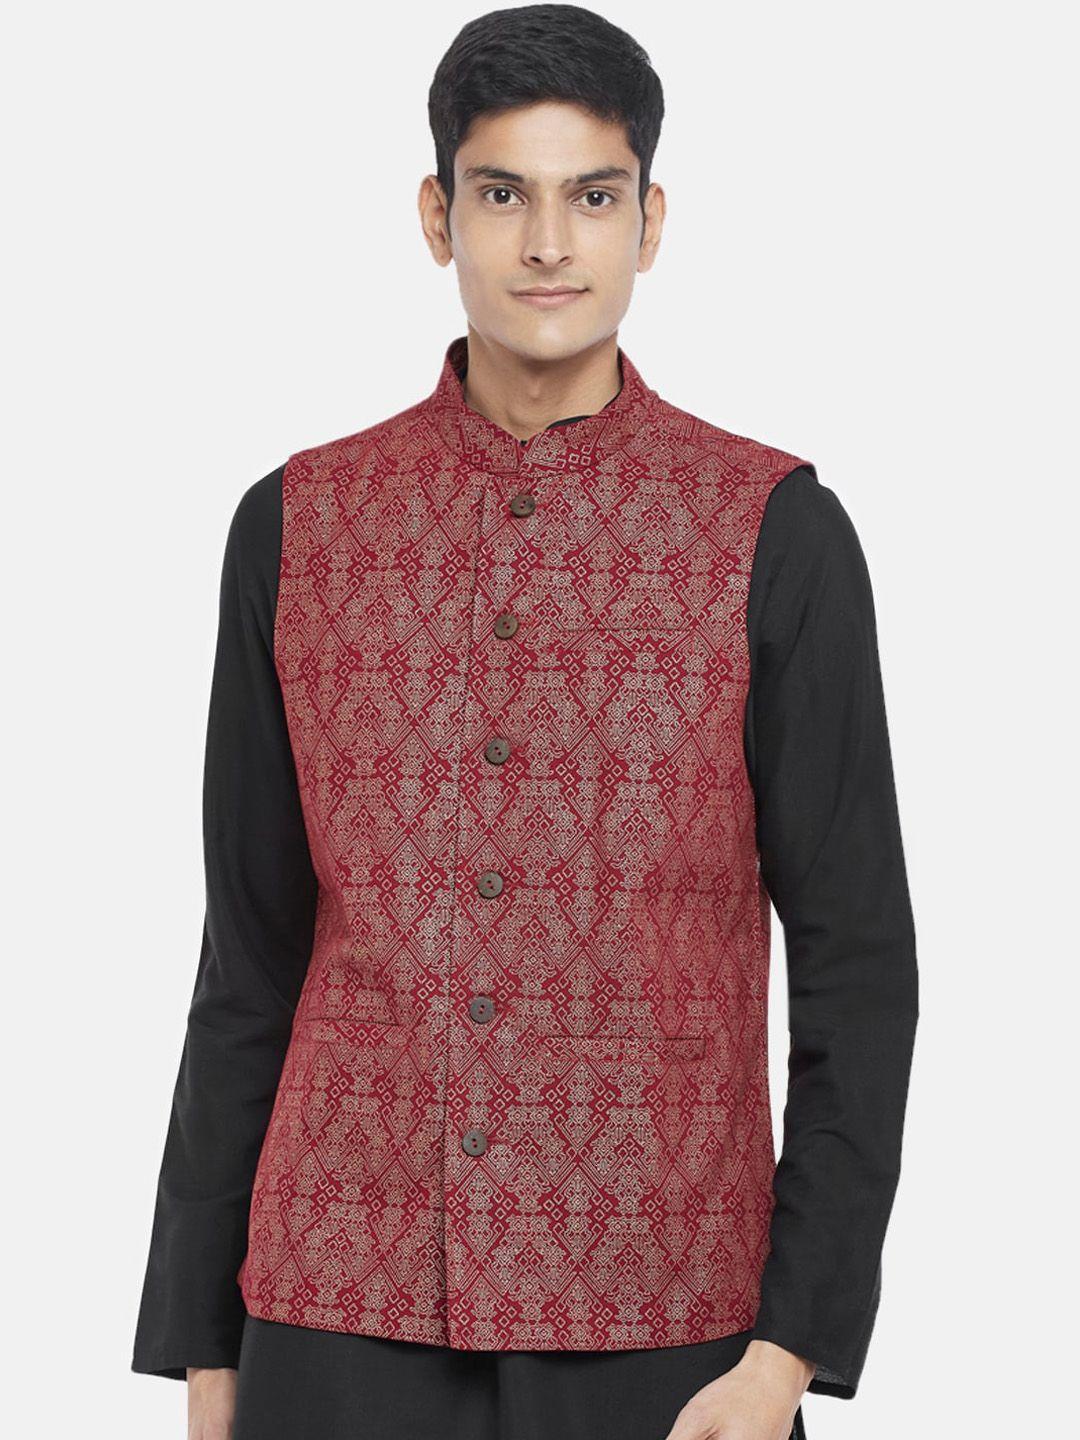 indus route by pantaloons men maroon & golden printed pure cotton woven waistcoat